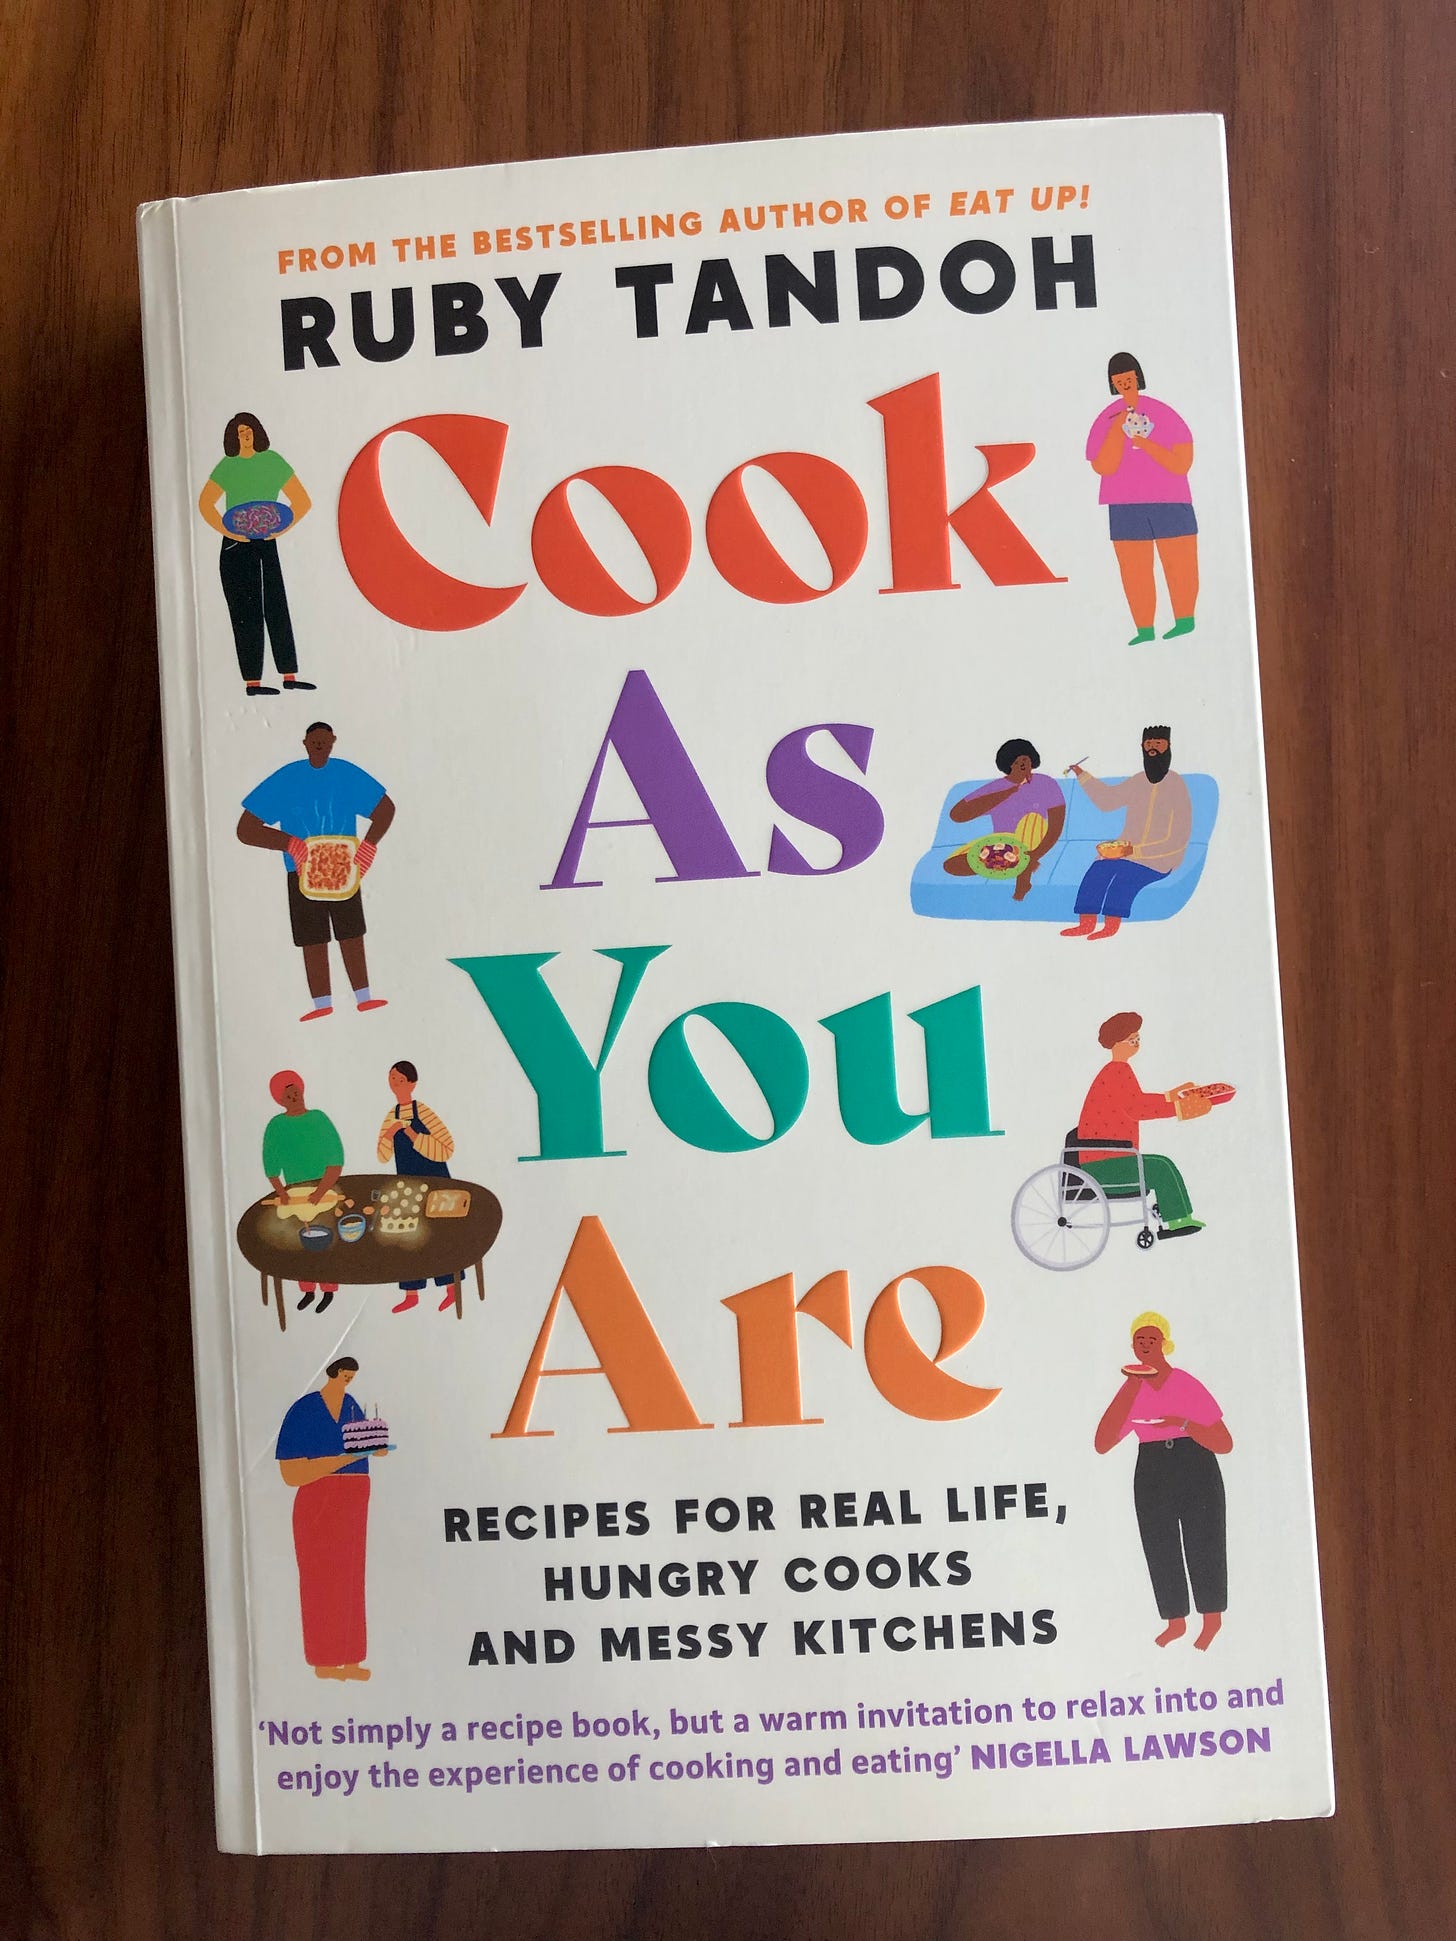 A photo of Cook As You, Ruby Tandoh's most recent cookbook